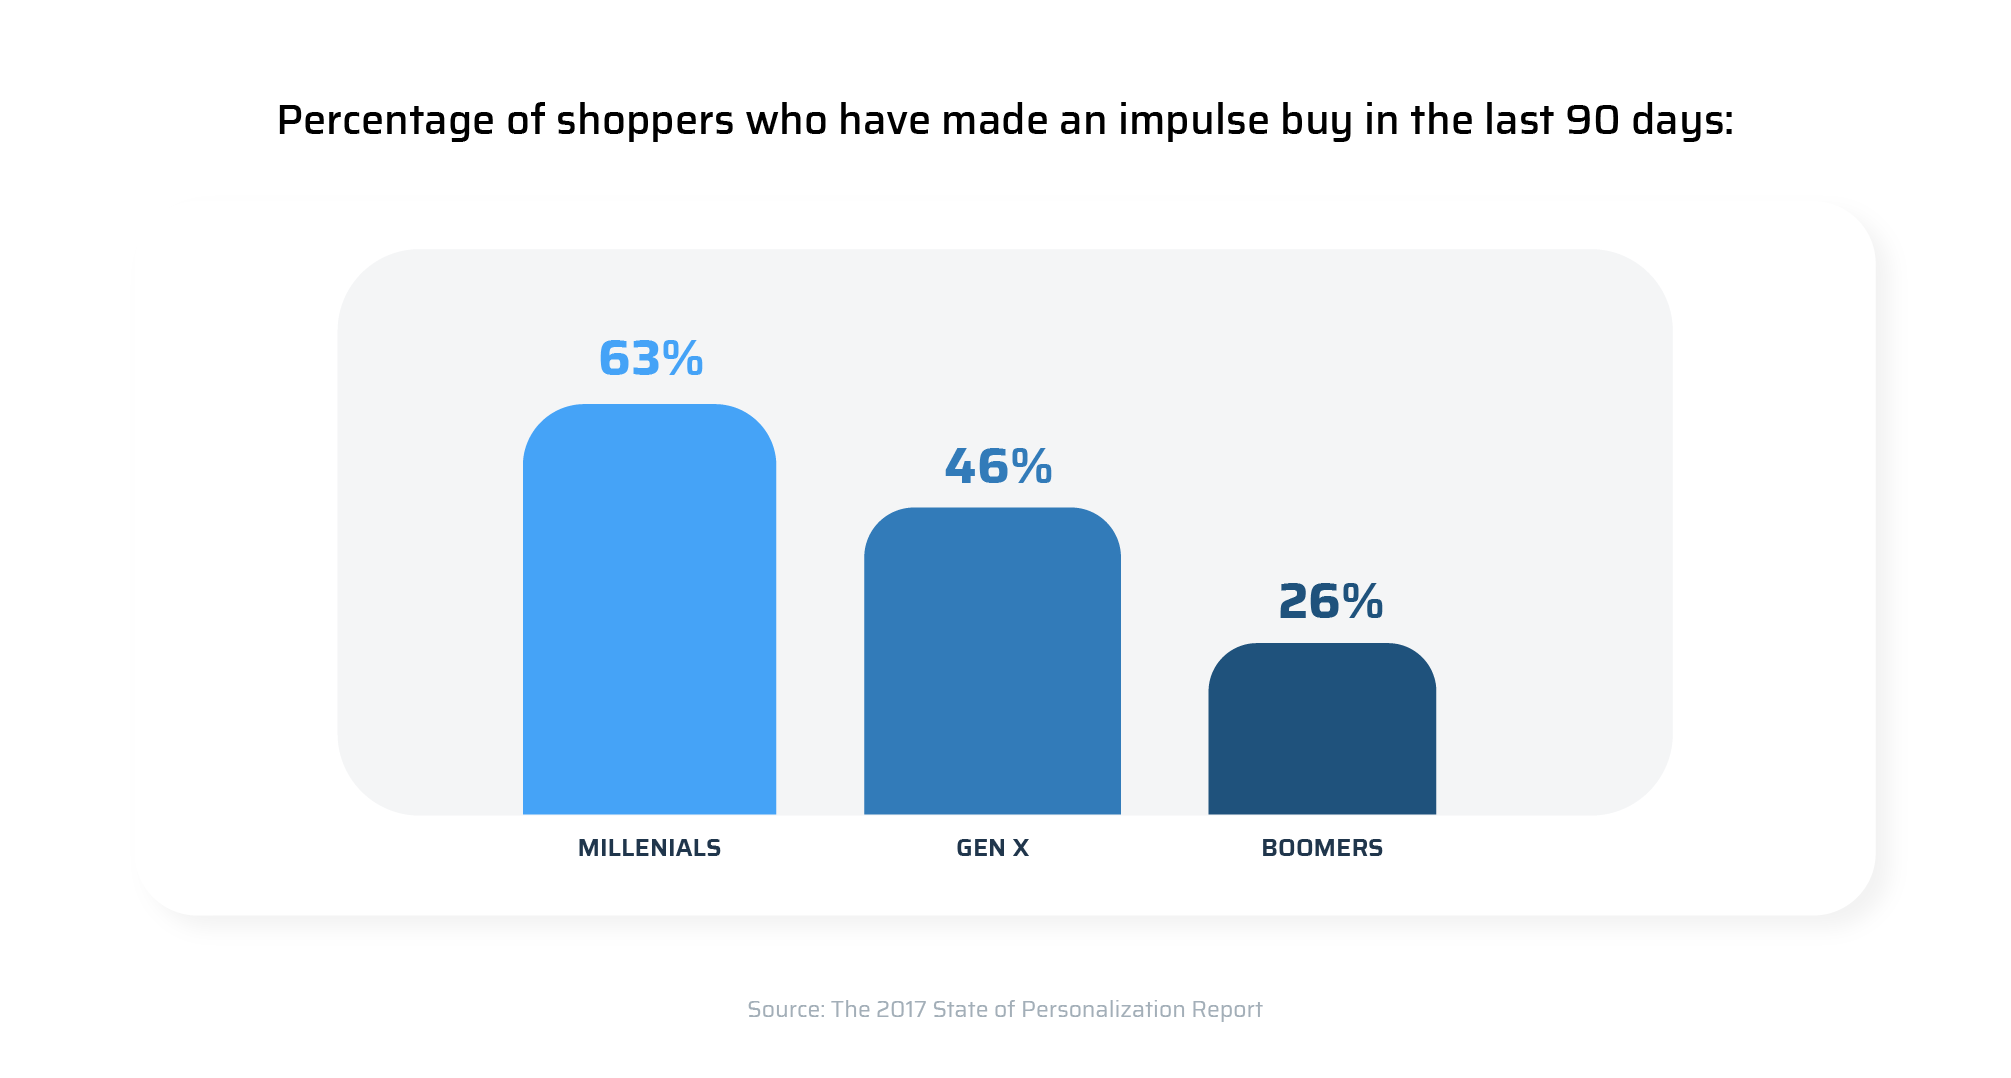 Percentage of shoppers who have made an impulse buy in the last 90 days 